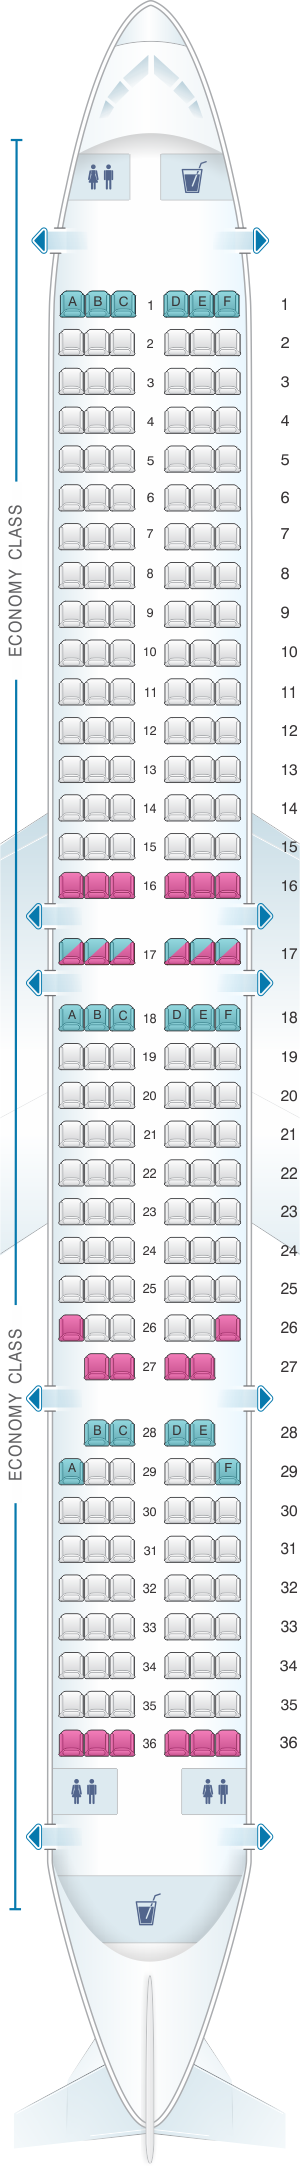 Seat map for SpiceJet Boeing B737 900ER